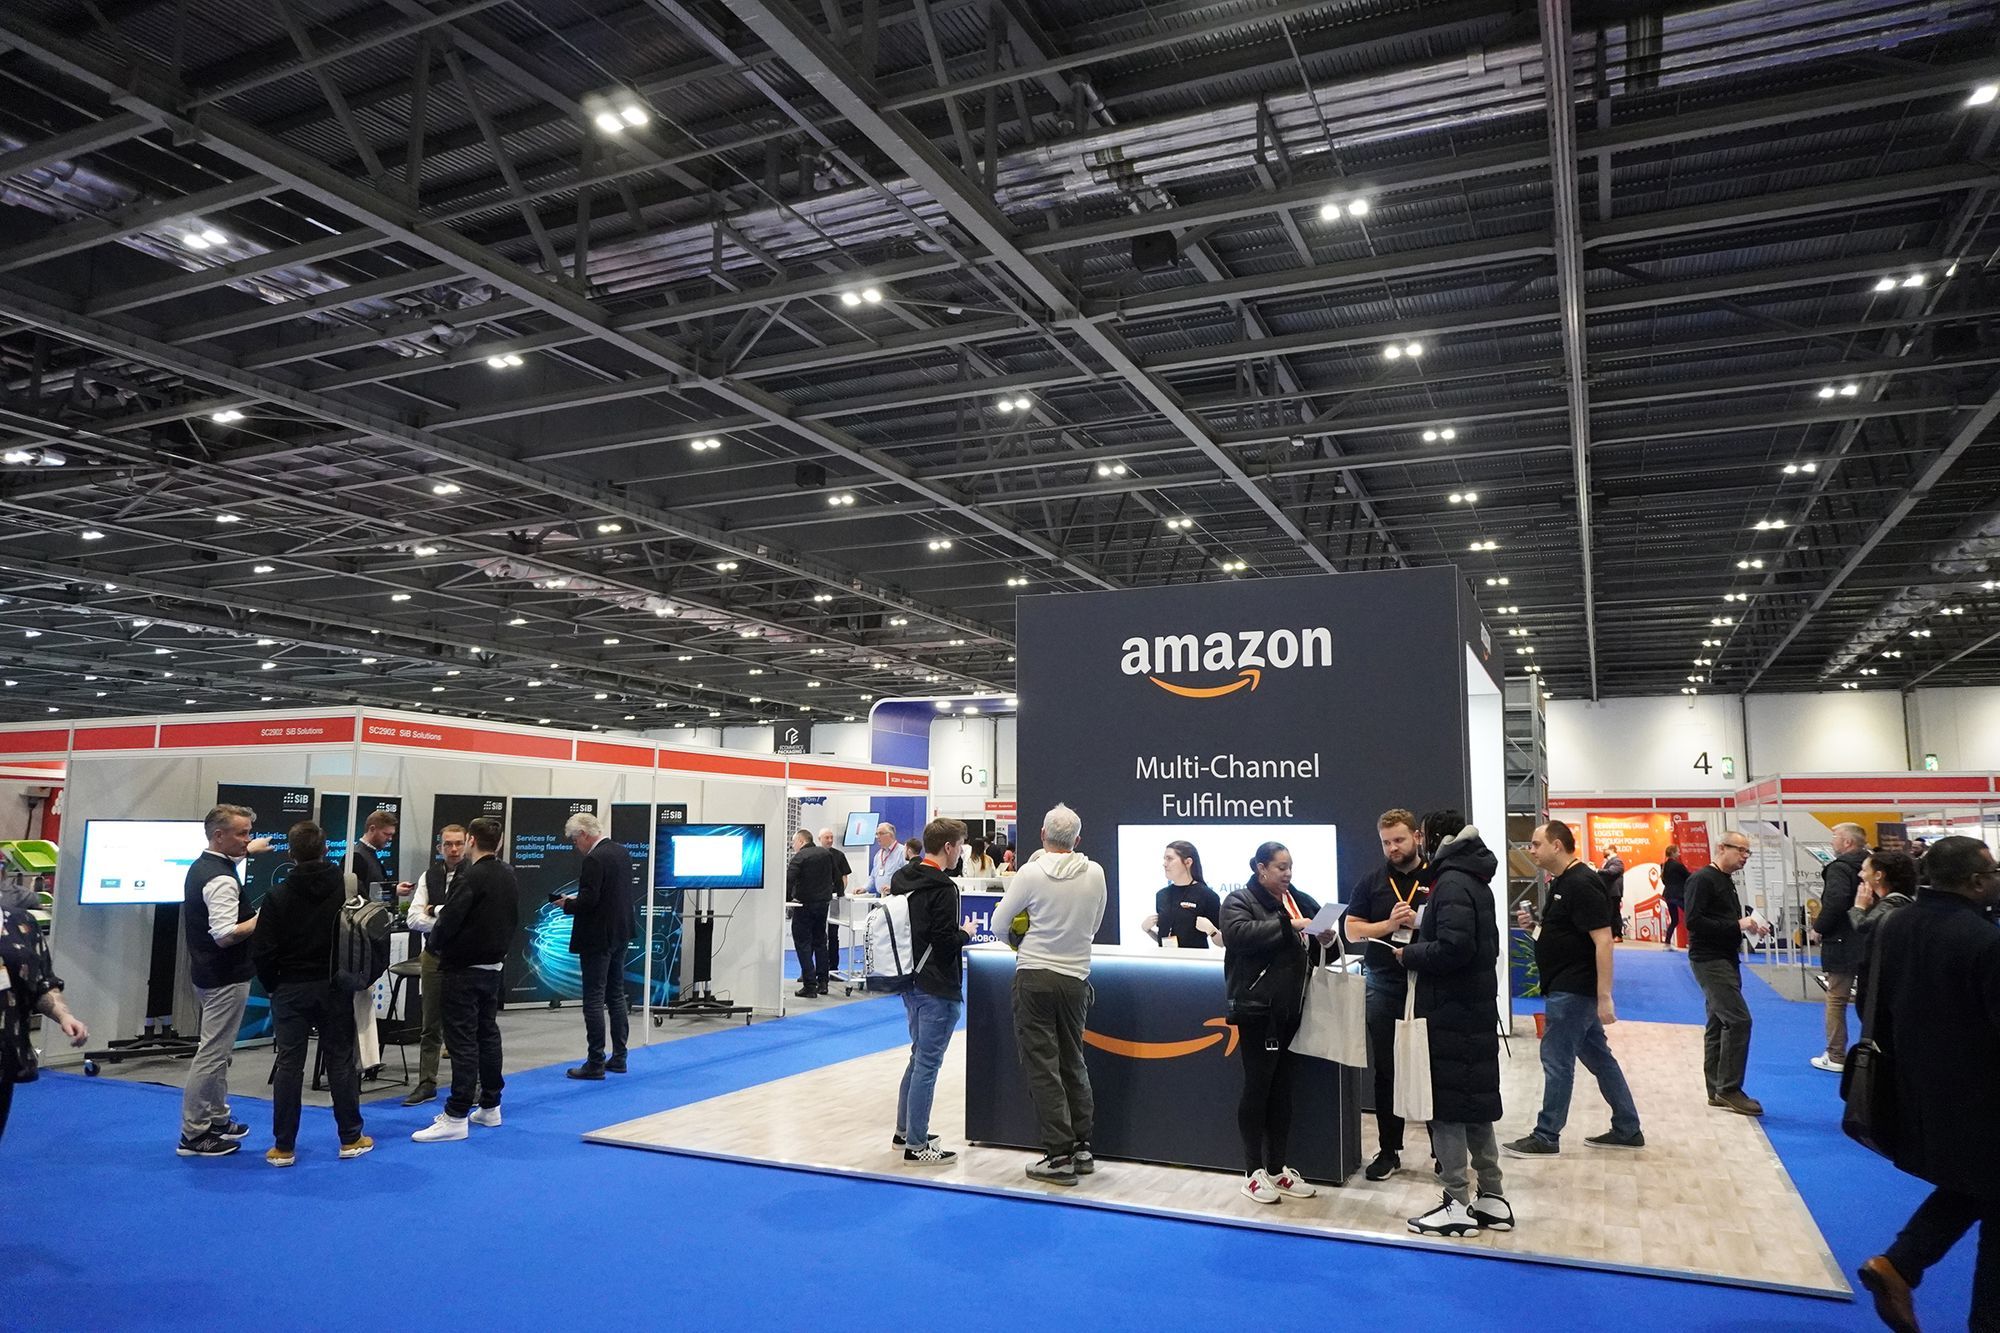 Amazon's booth at the Smart Retail Tech Expo